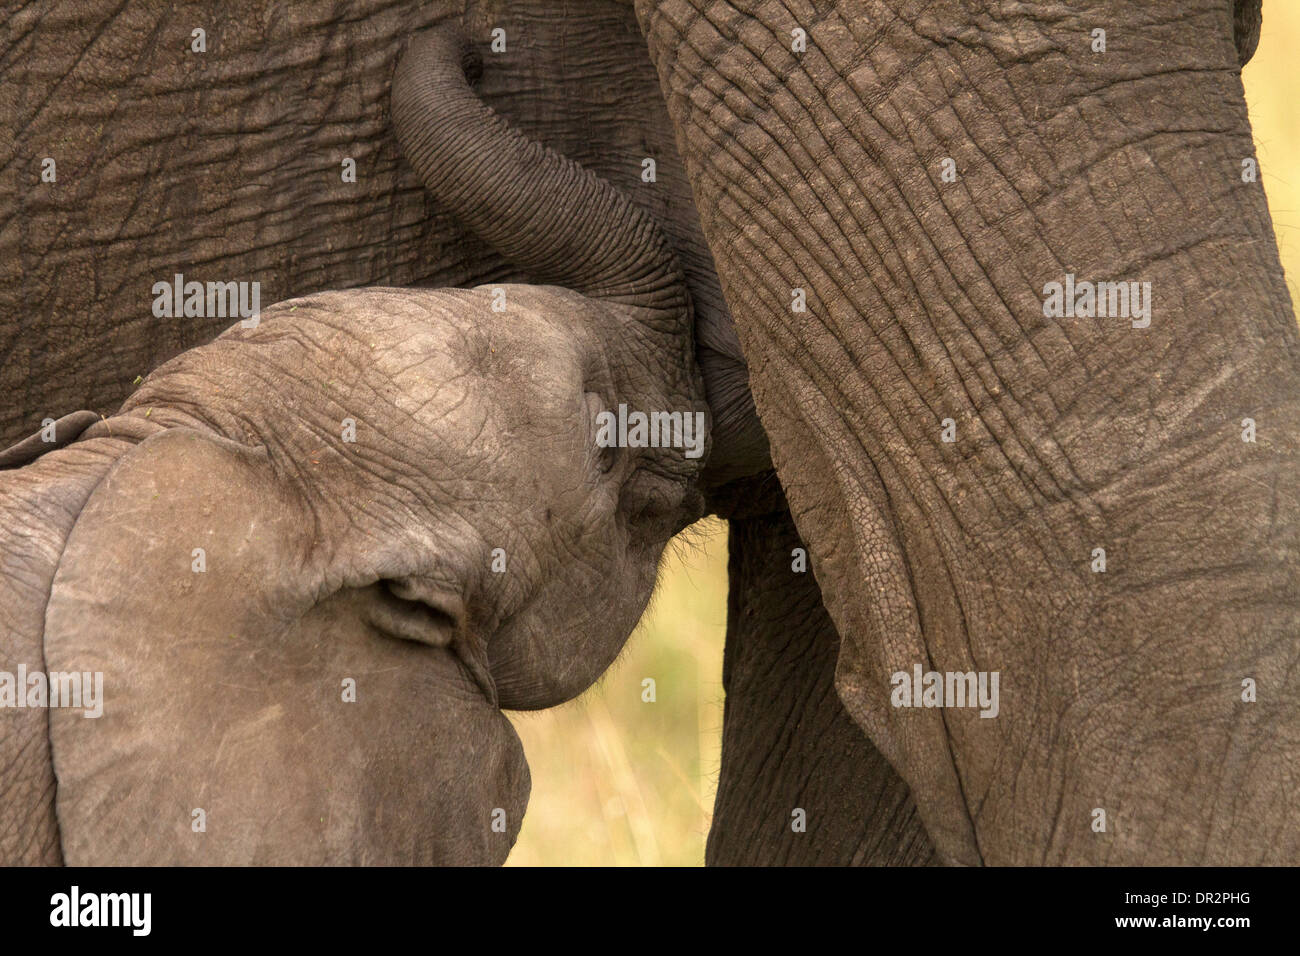 Young Elephant, Loxodonta Africana feeding with an adult Stock Photo